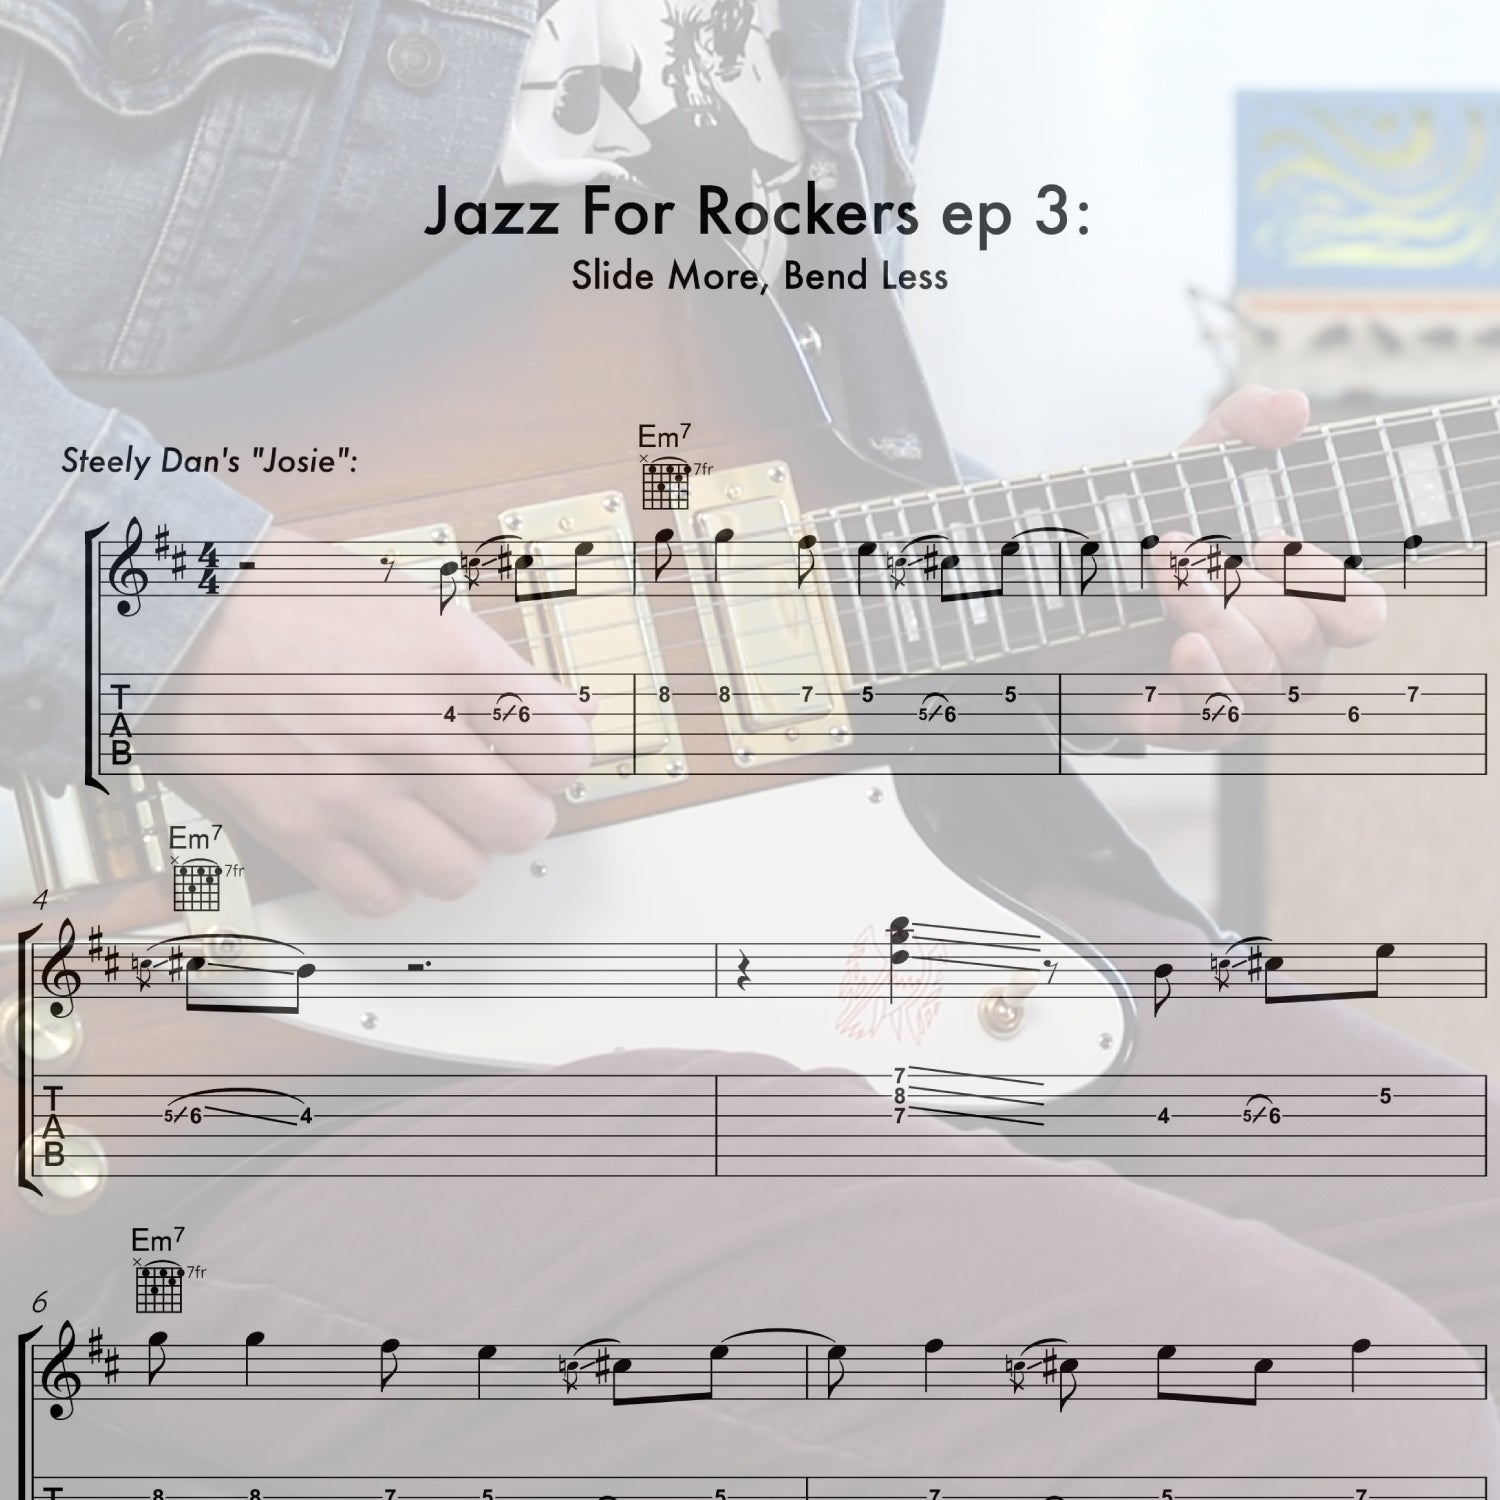 Jazz For Rockers ep 3: Slide More, Bend Less